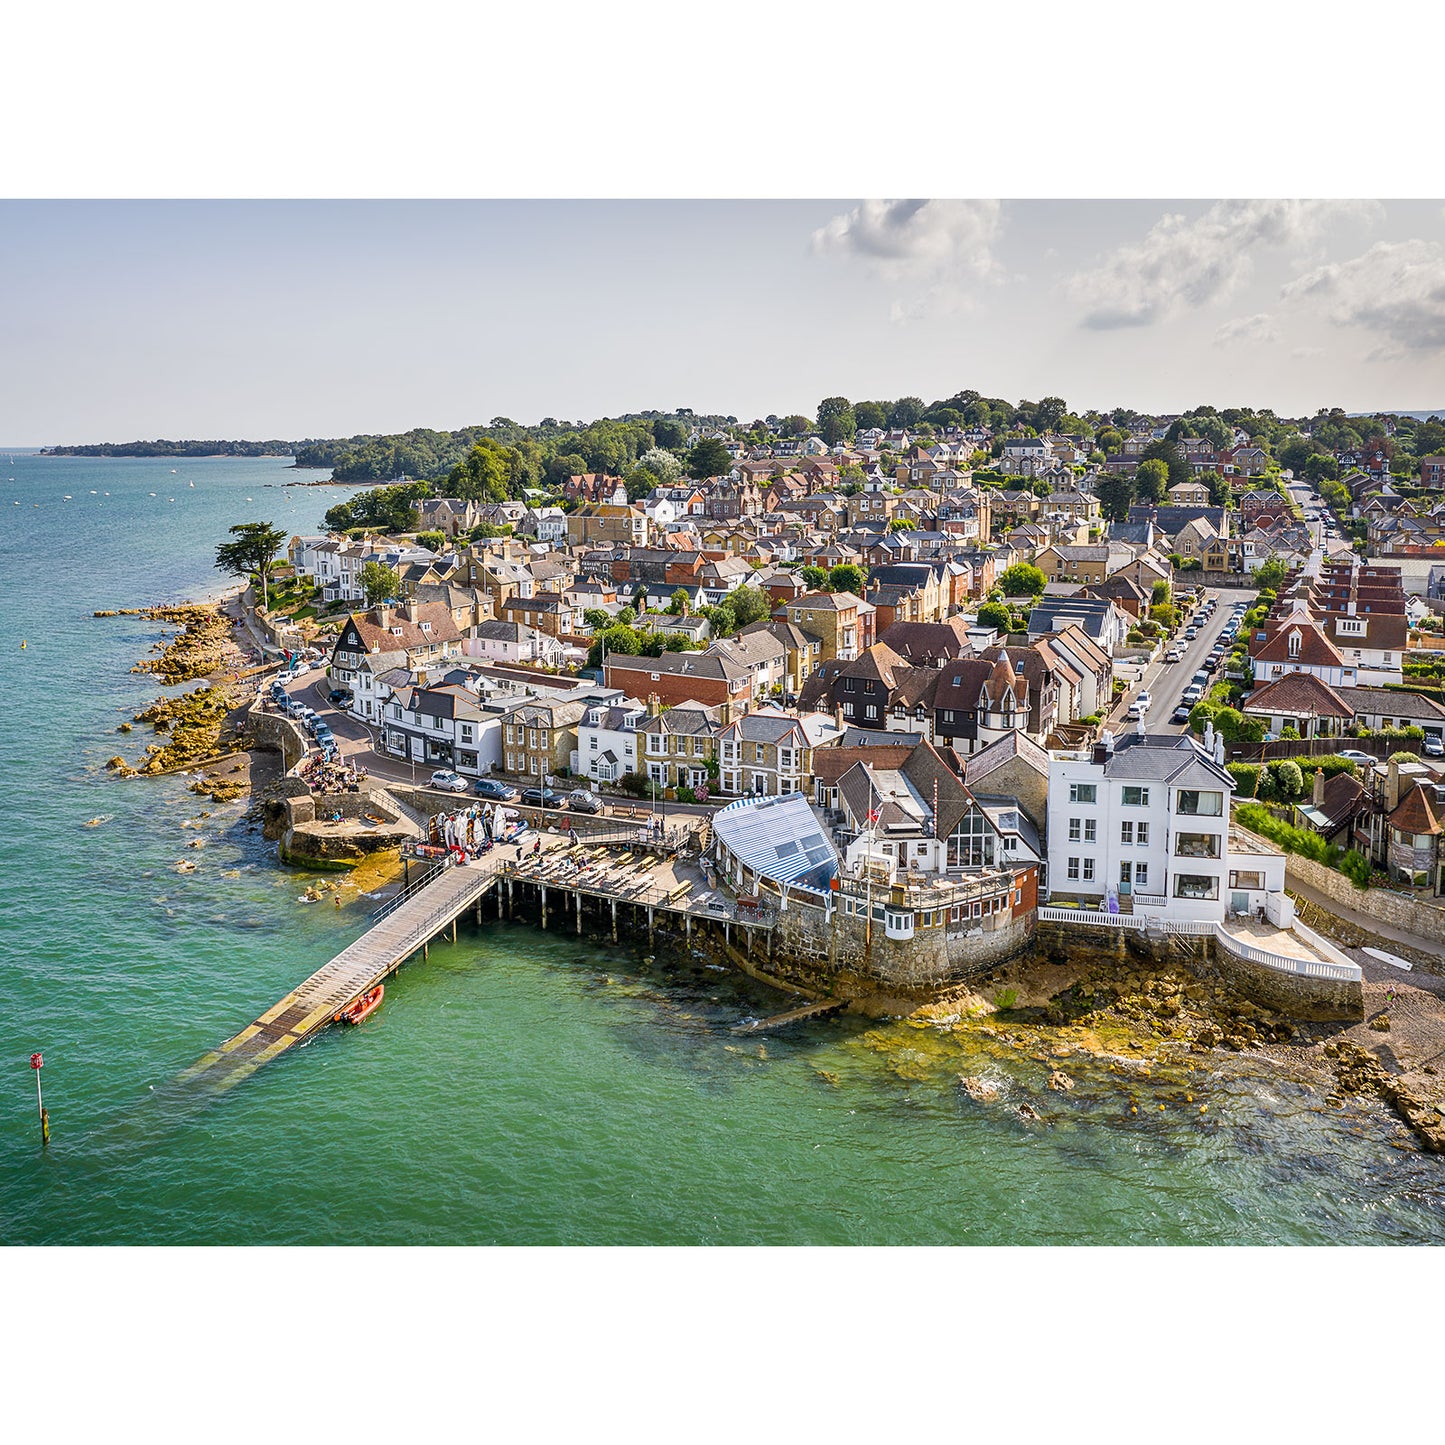 Aerial view of Seaview, a coastal town on the Isle of Wight with buildings adjacent to a pier extending into clear blue waters, captured by Available Light Photography.